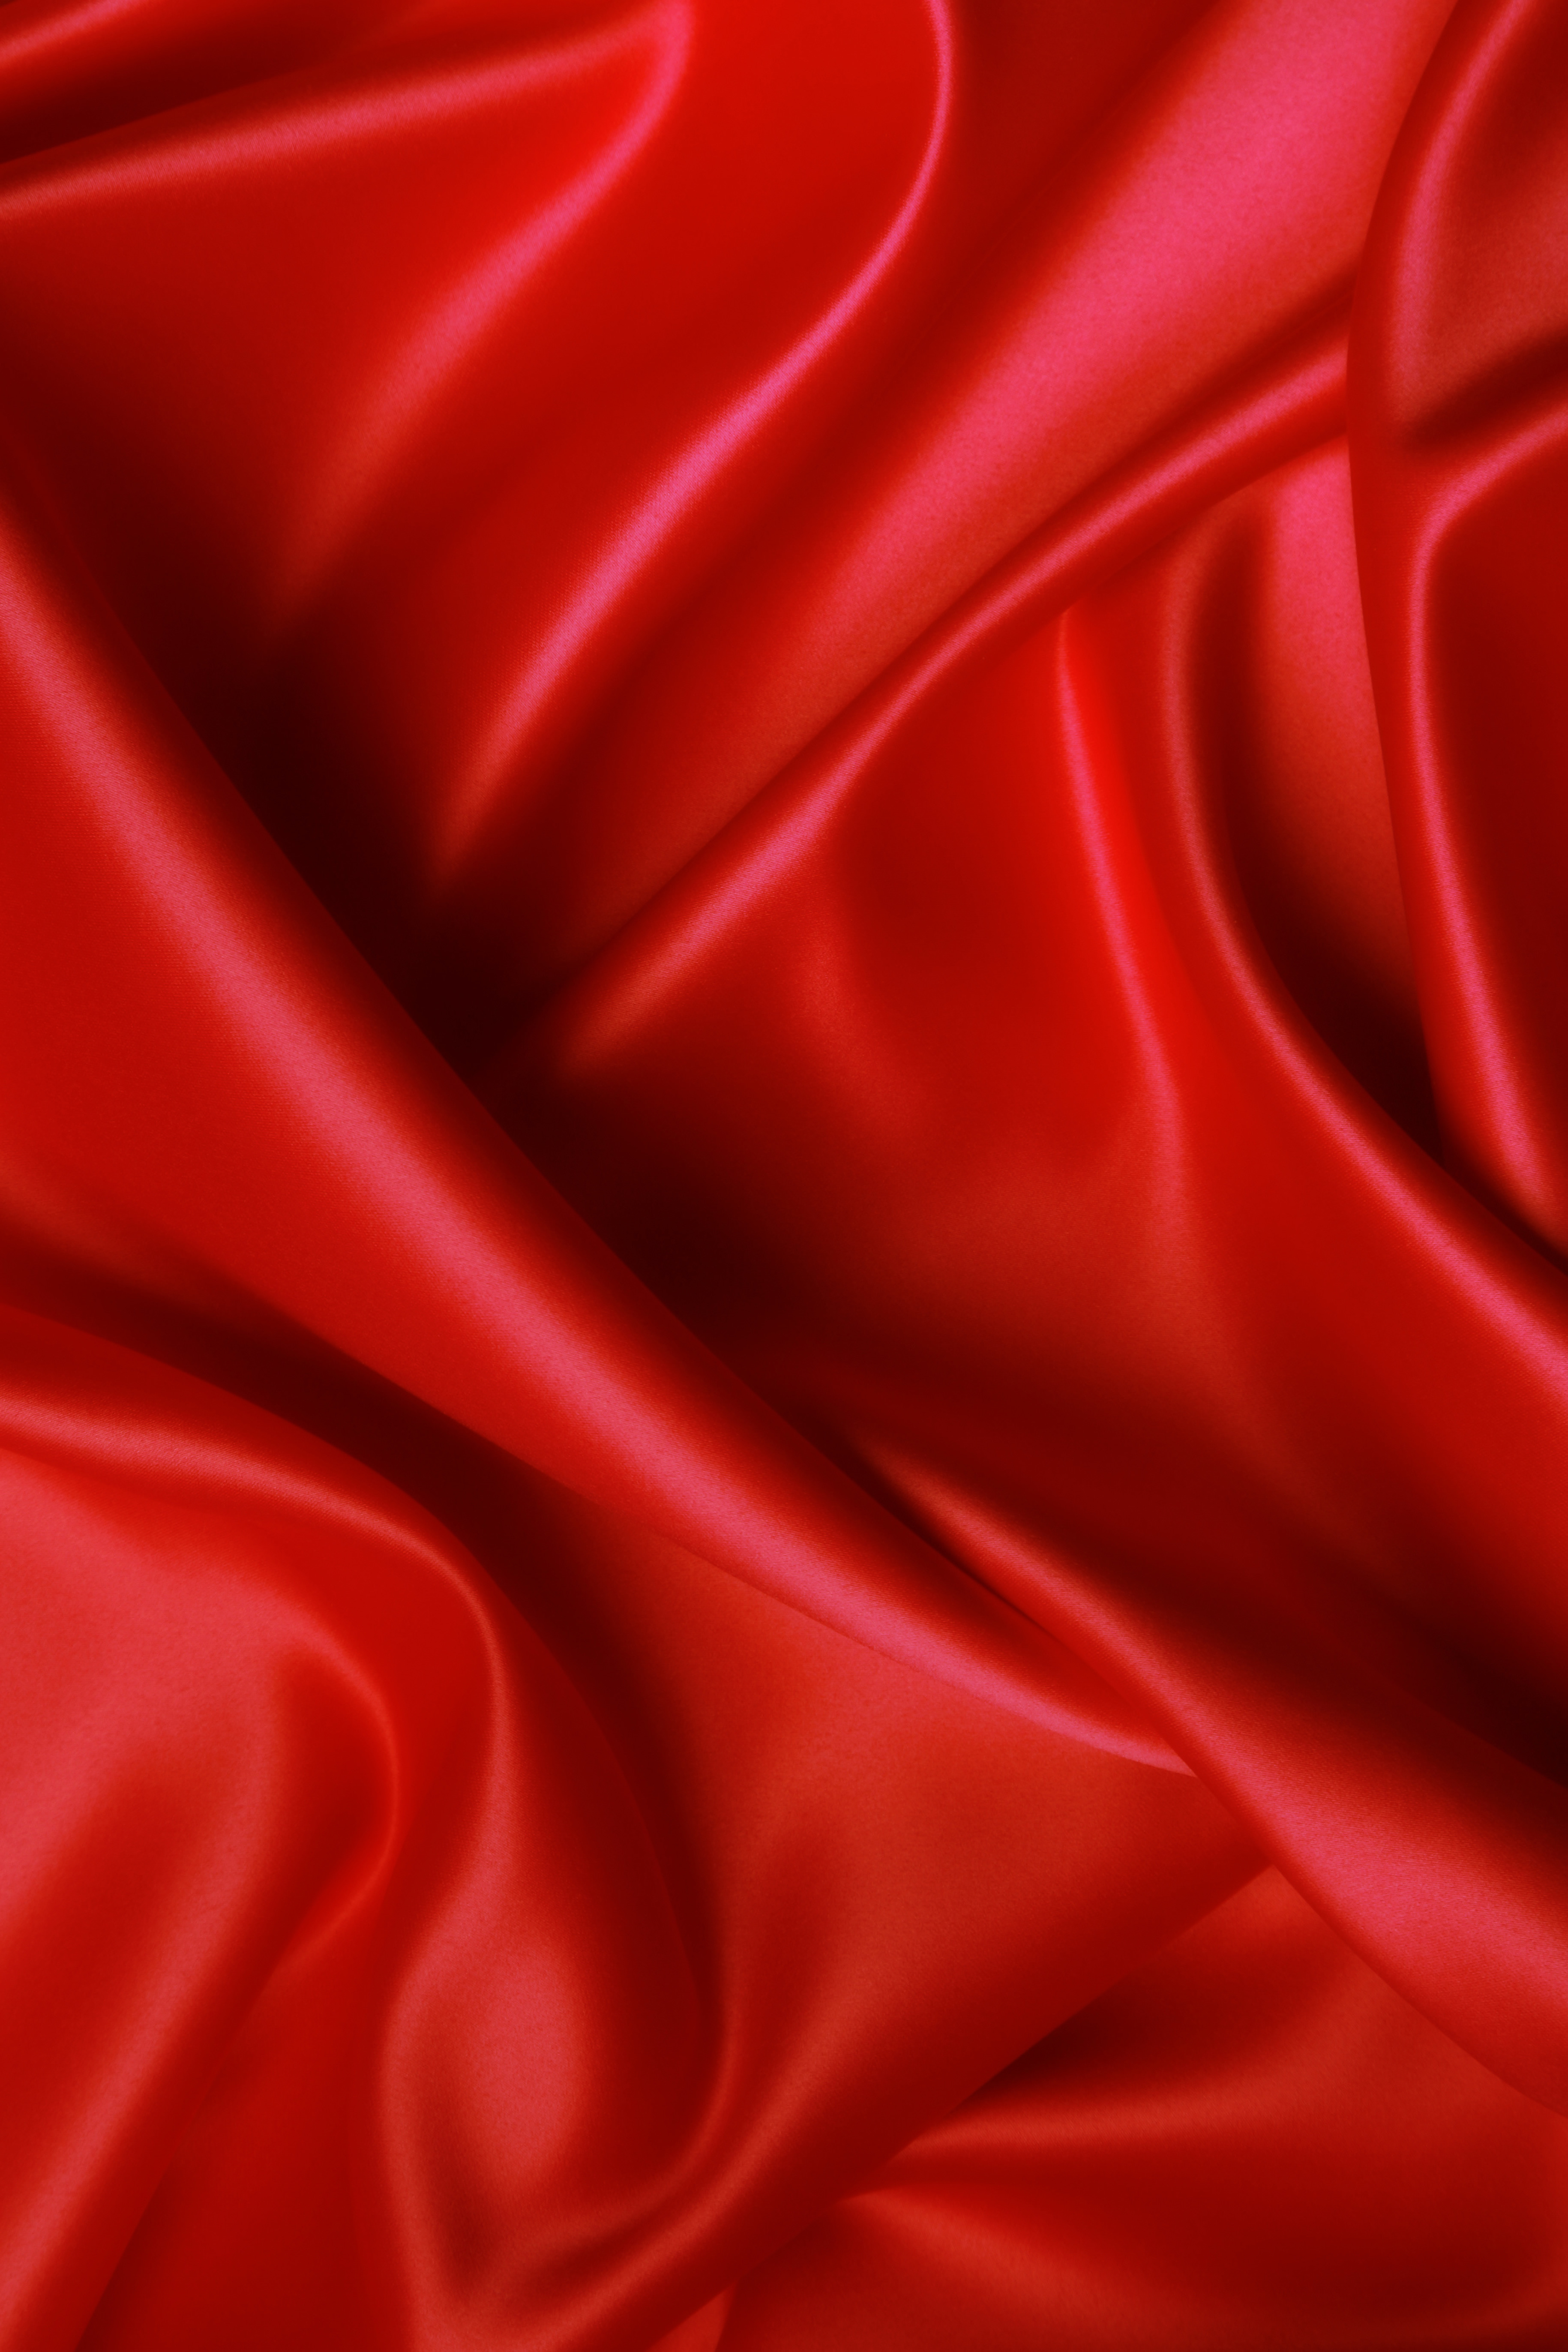 Red Fabric Cloth Silk Photo Background Texture Satin